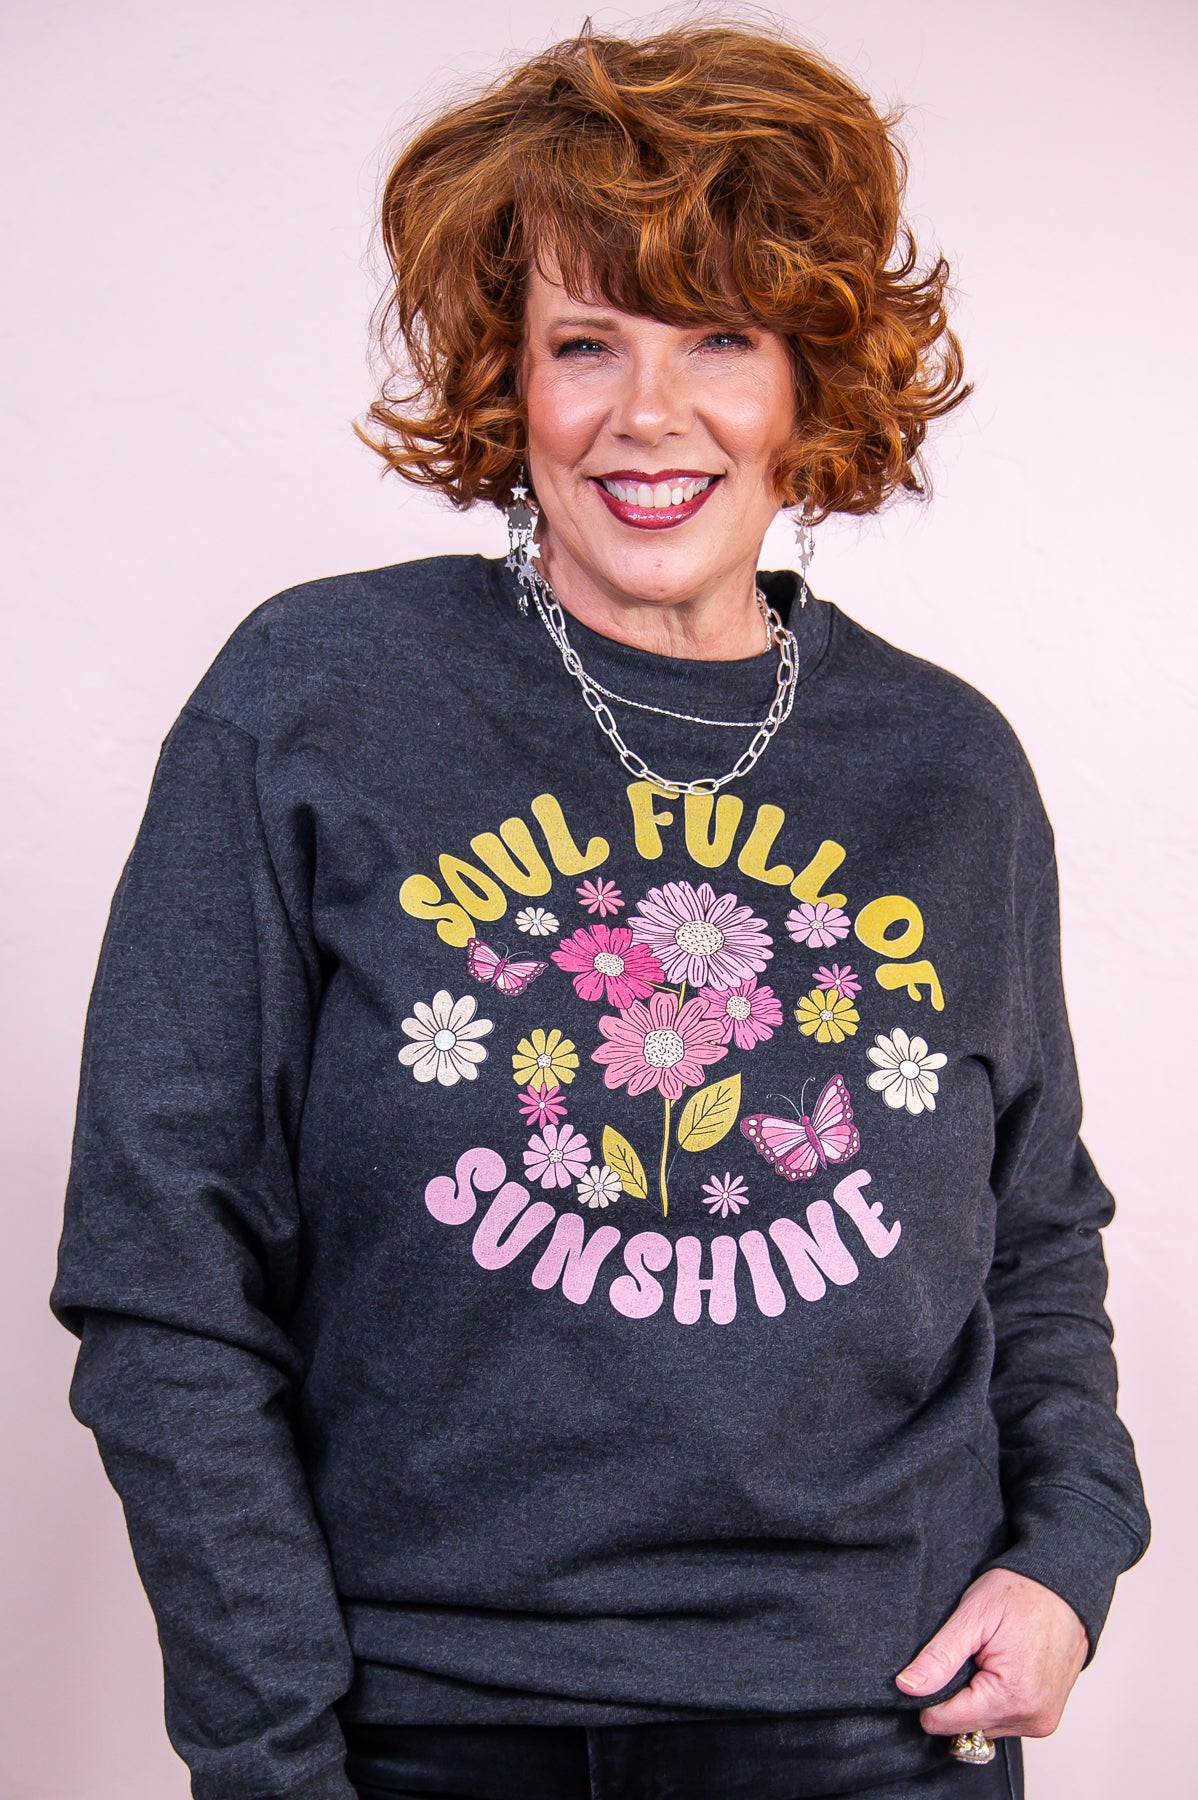 Soul Full Of Sunshine Charcoal Floral Graphic Sweatshirt - A3215CH